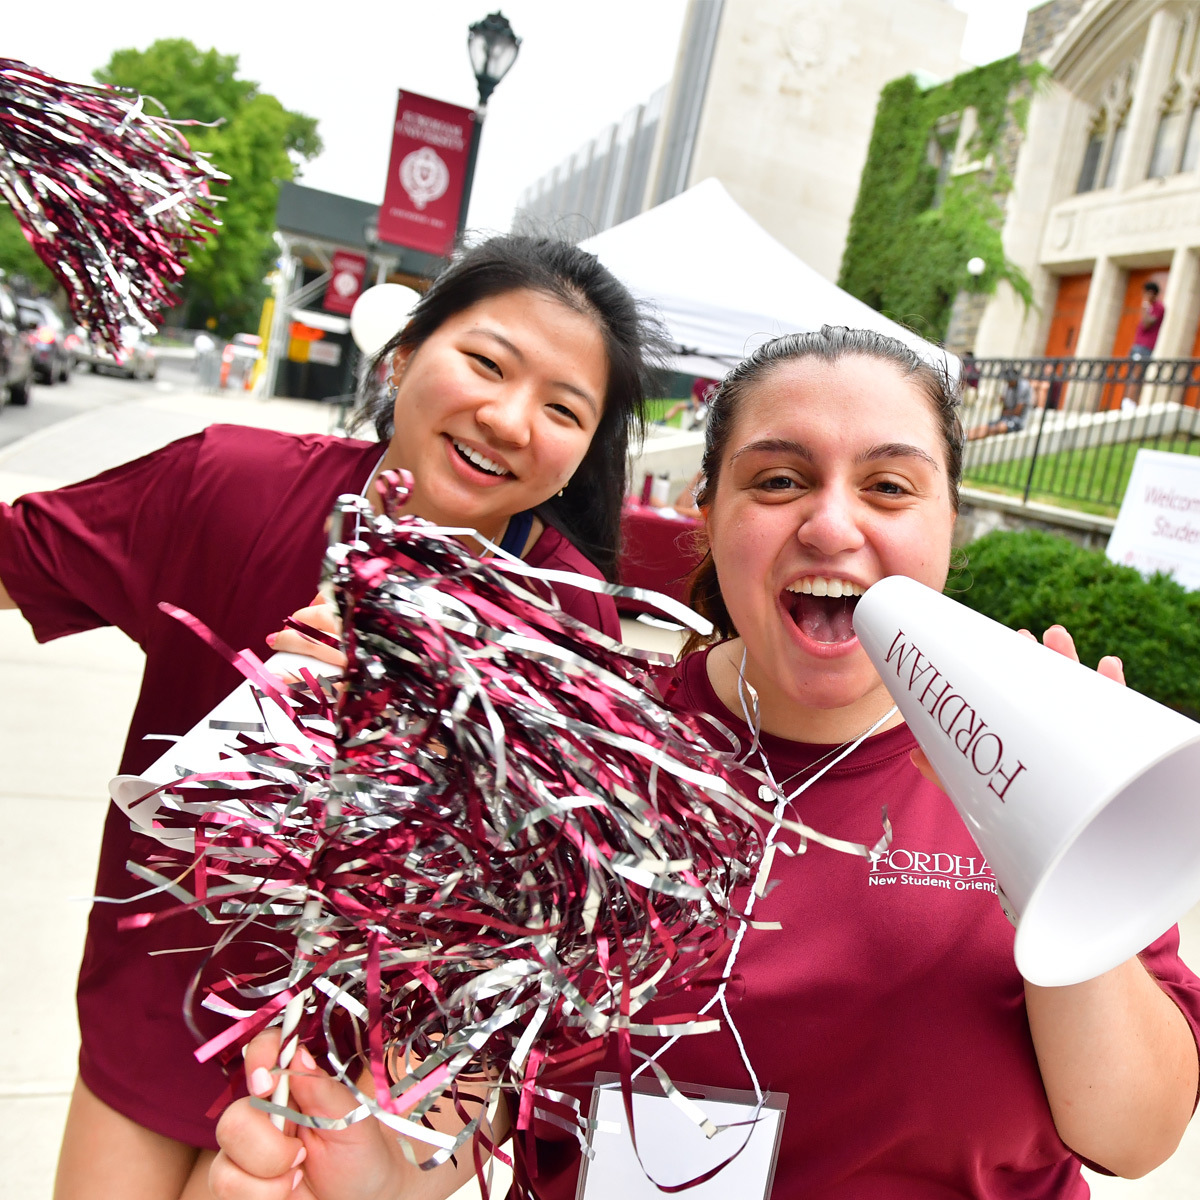 Two students cheering at New Student Orientation at Rose Hill